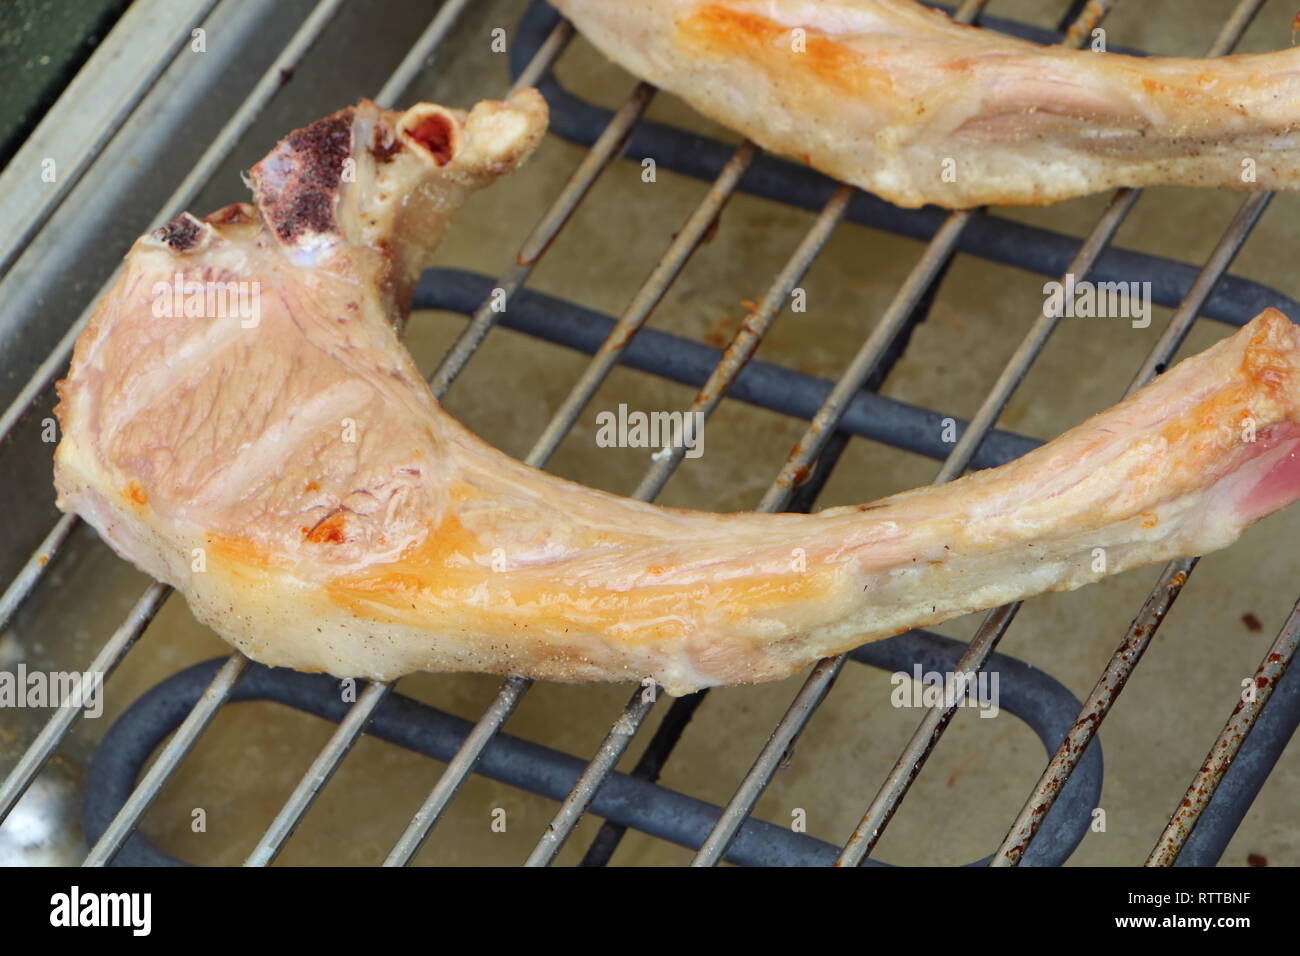 Lamb chops on the rack of an electric barbecue Stock Photo